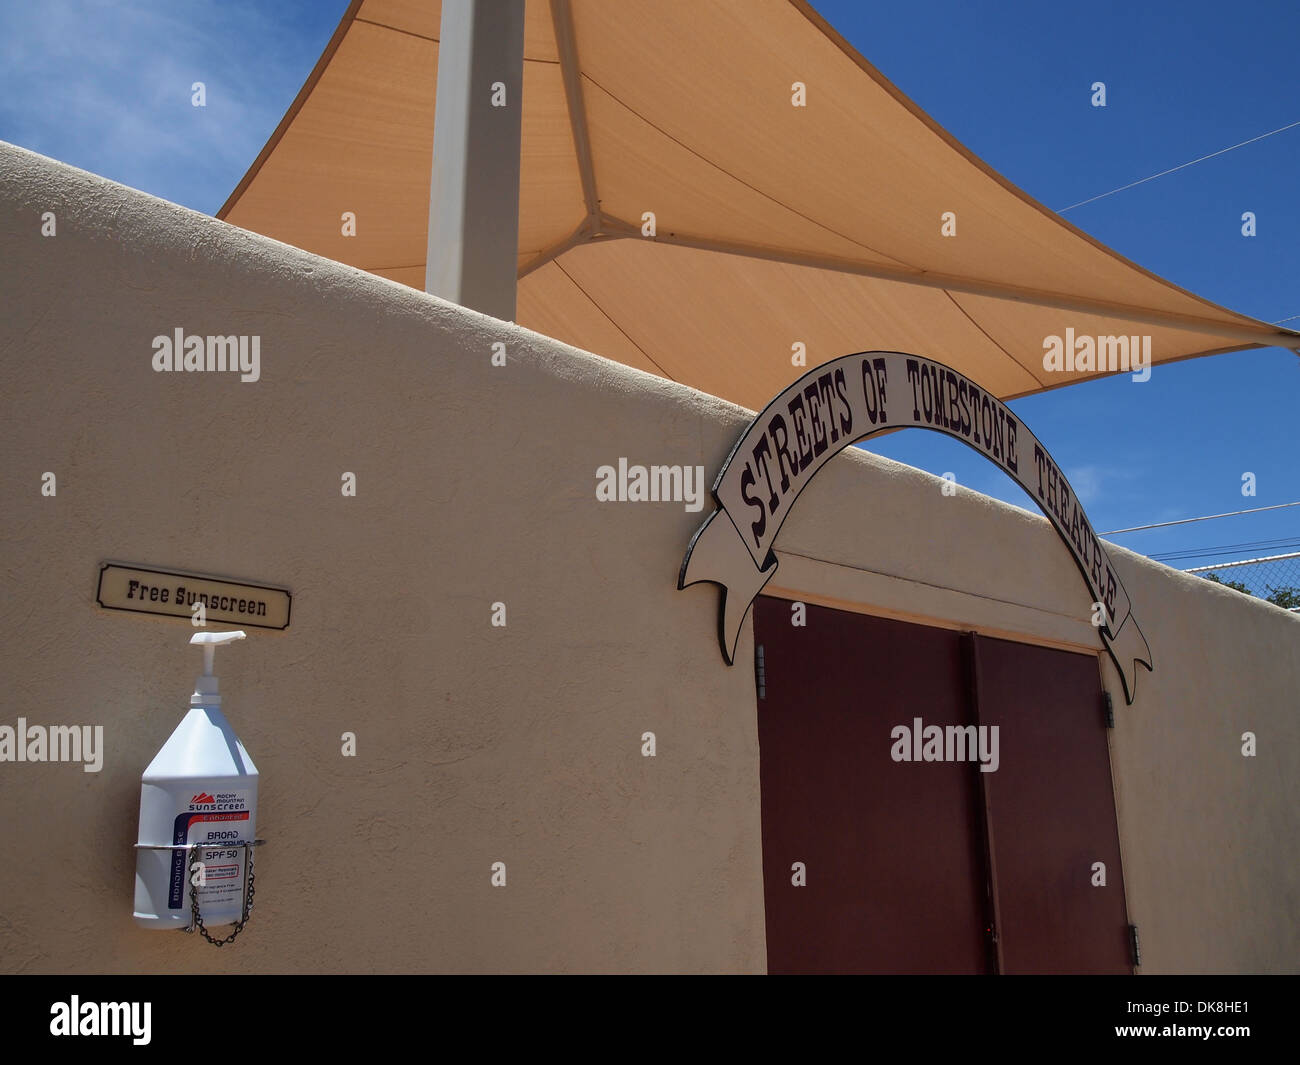 Free sunscreen offered at the entrance to the Streets of Tombstone Theatre in the American Old West of Tombstone, Arizona, USA Stock Photo